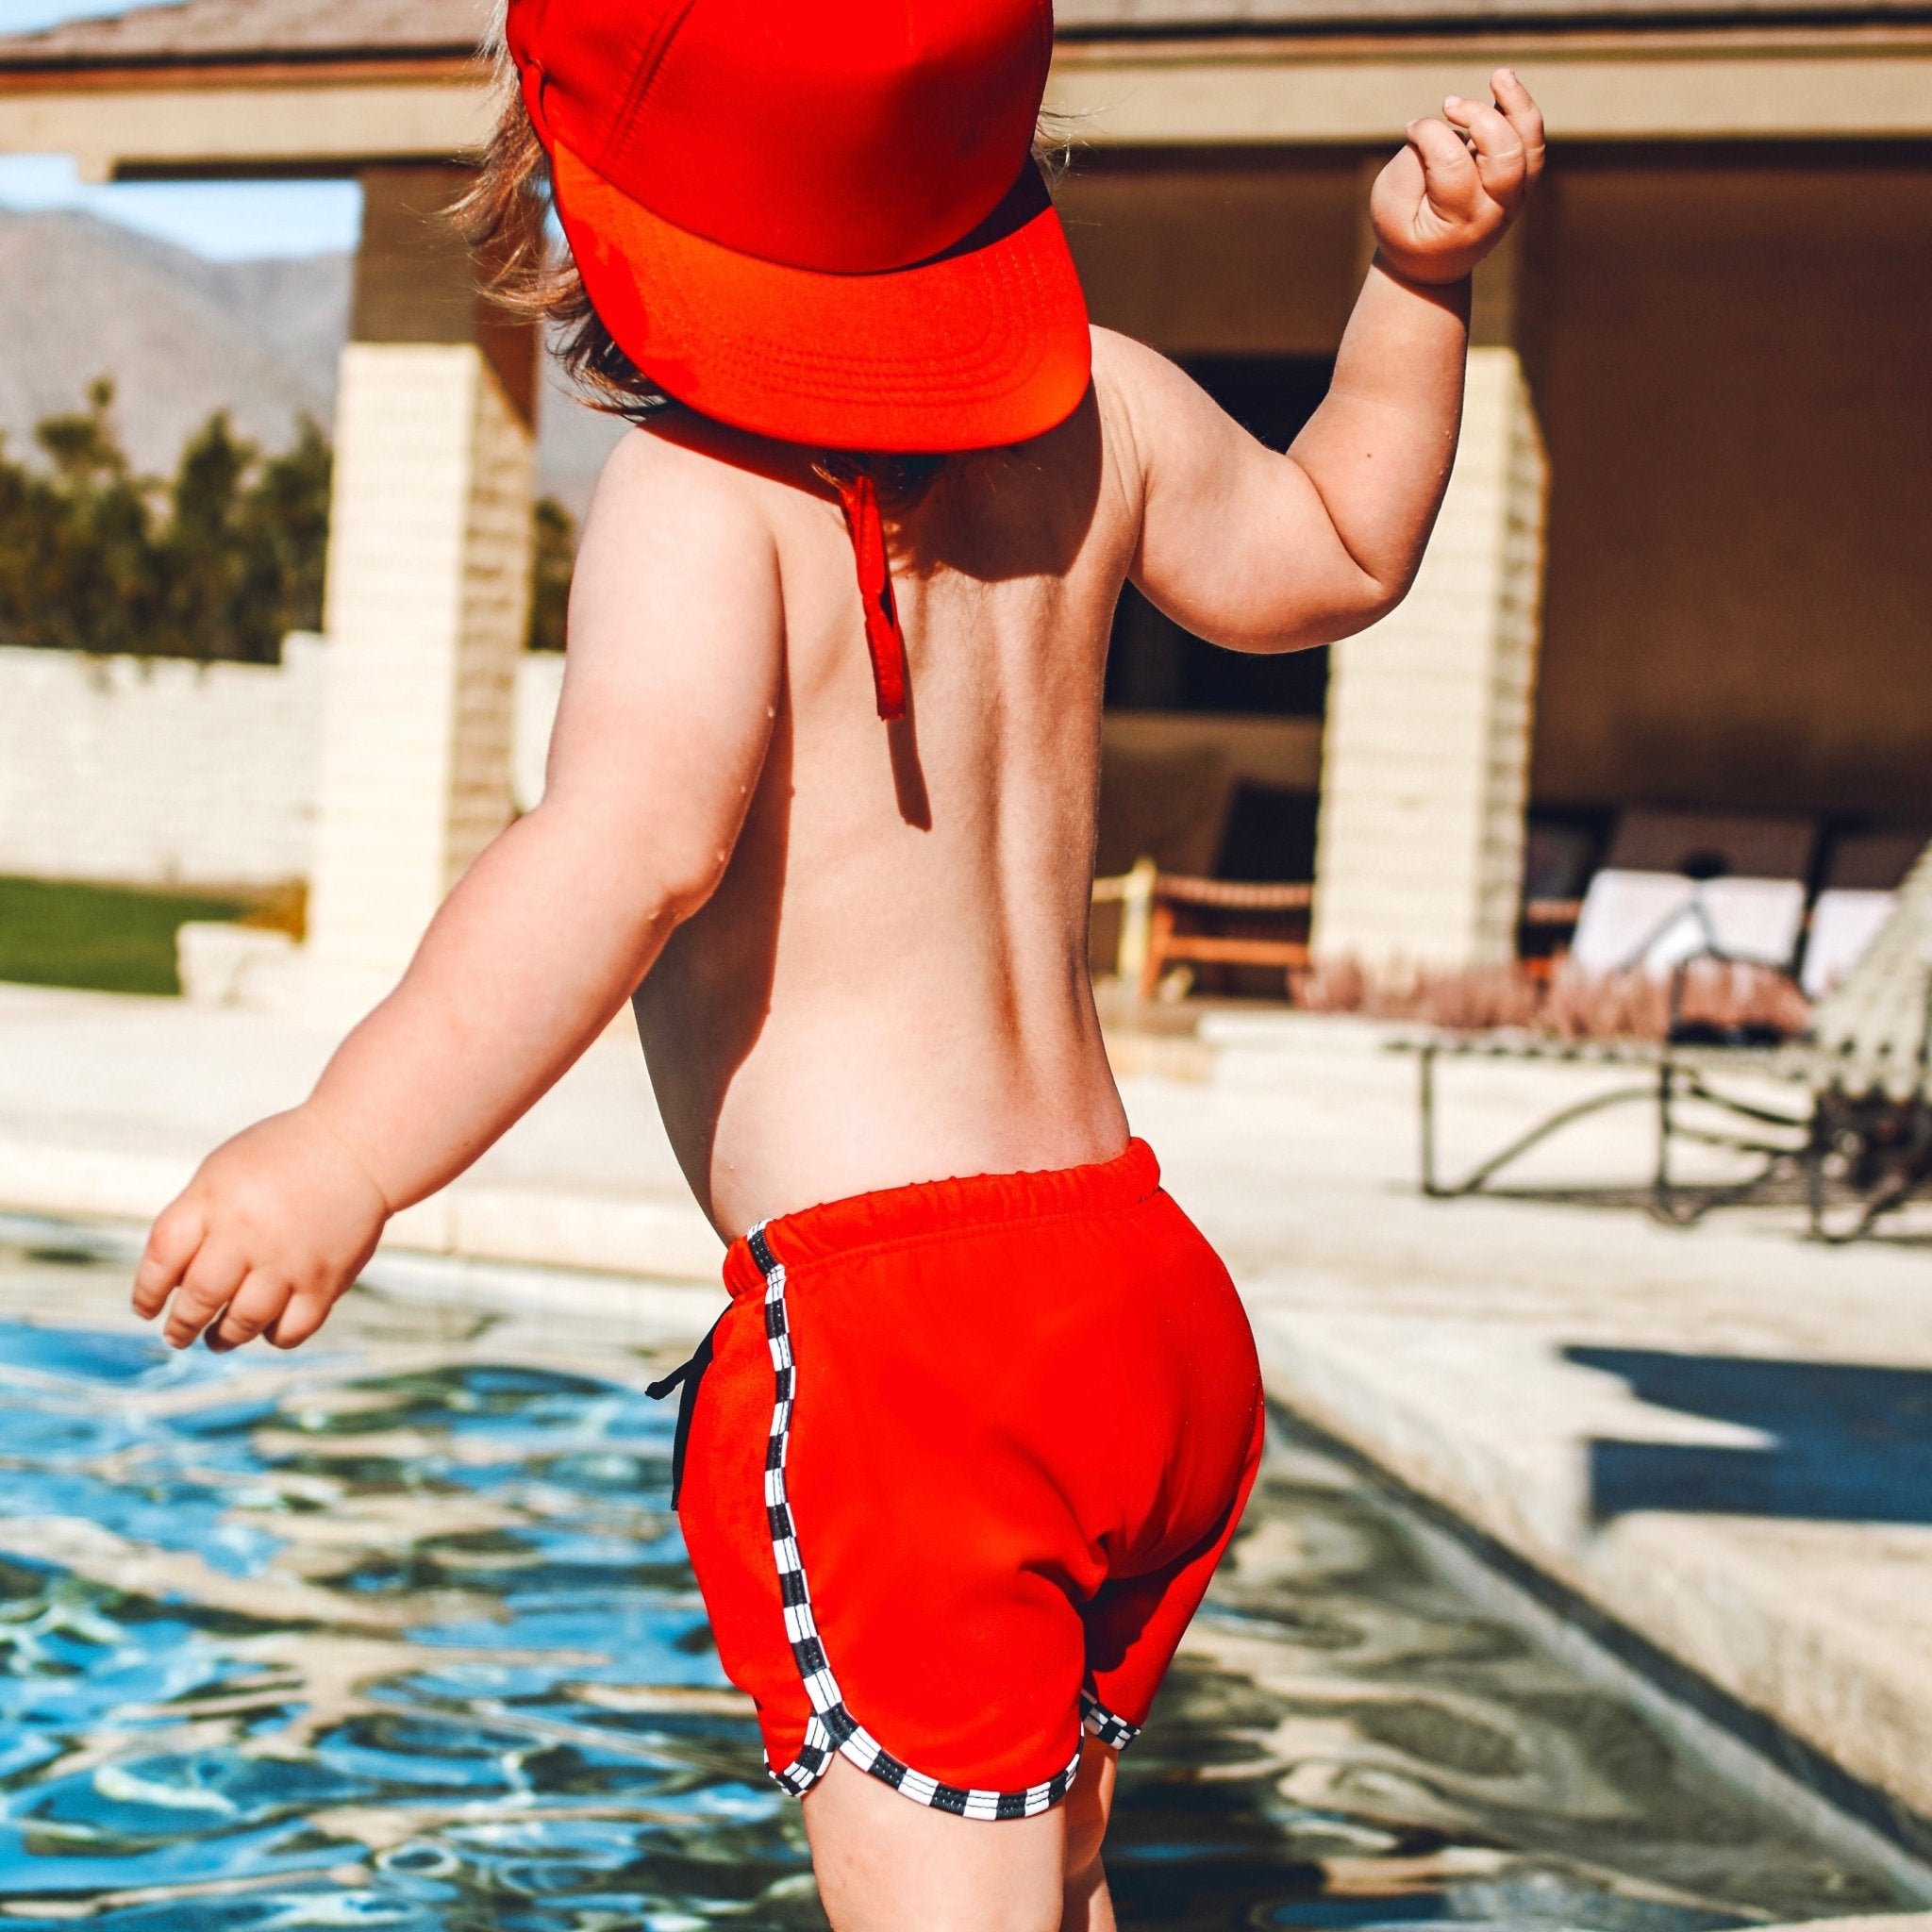 Red Check Track Swim Shorts - George Hats